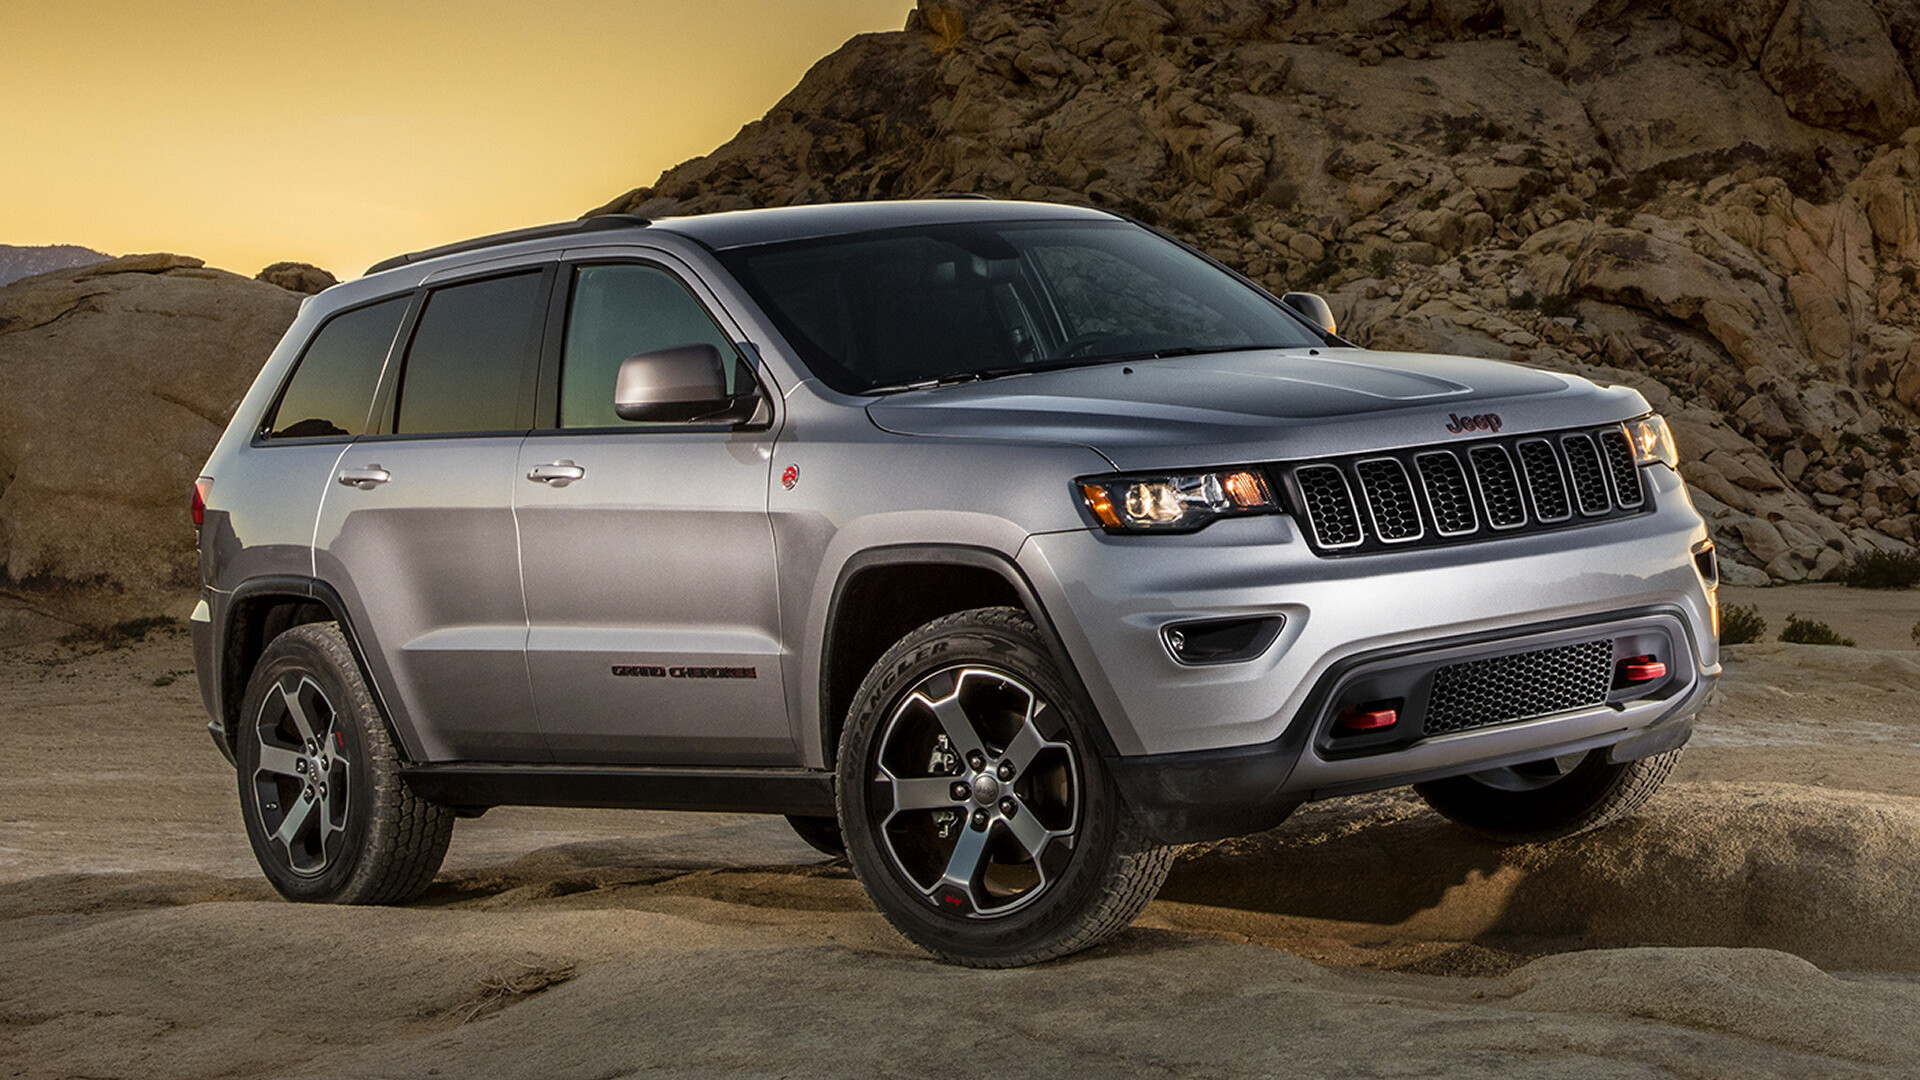 Jeep Grand Cherokee: 2017 Trailhawk package, Quadra-Drive II 4x4 system, a package-specific version of the Quadra-Lift air suspension system. 1920x1080 Full HD Wallpaper.